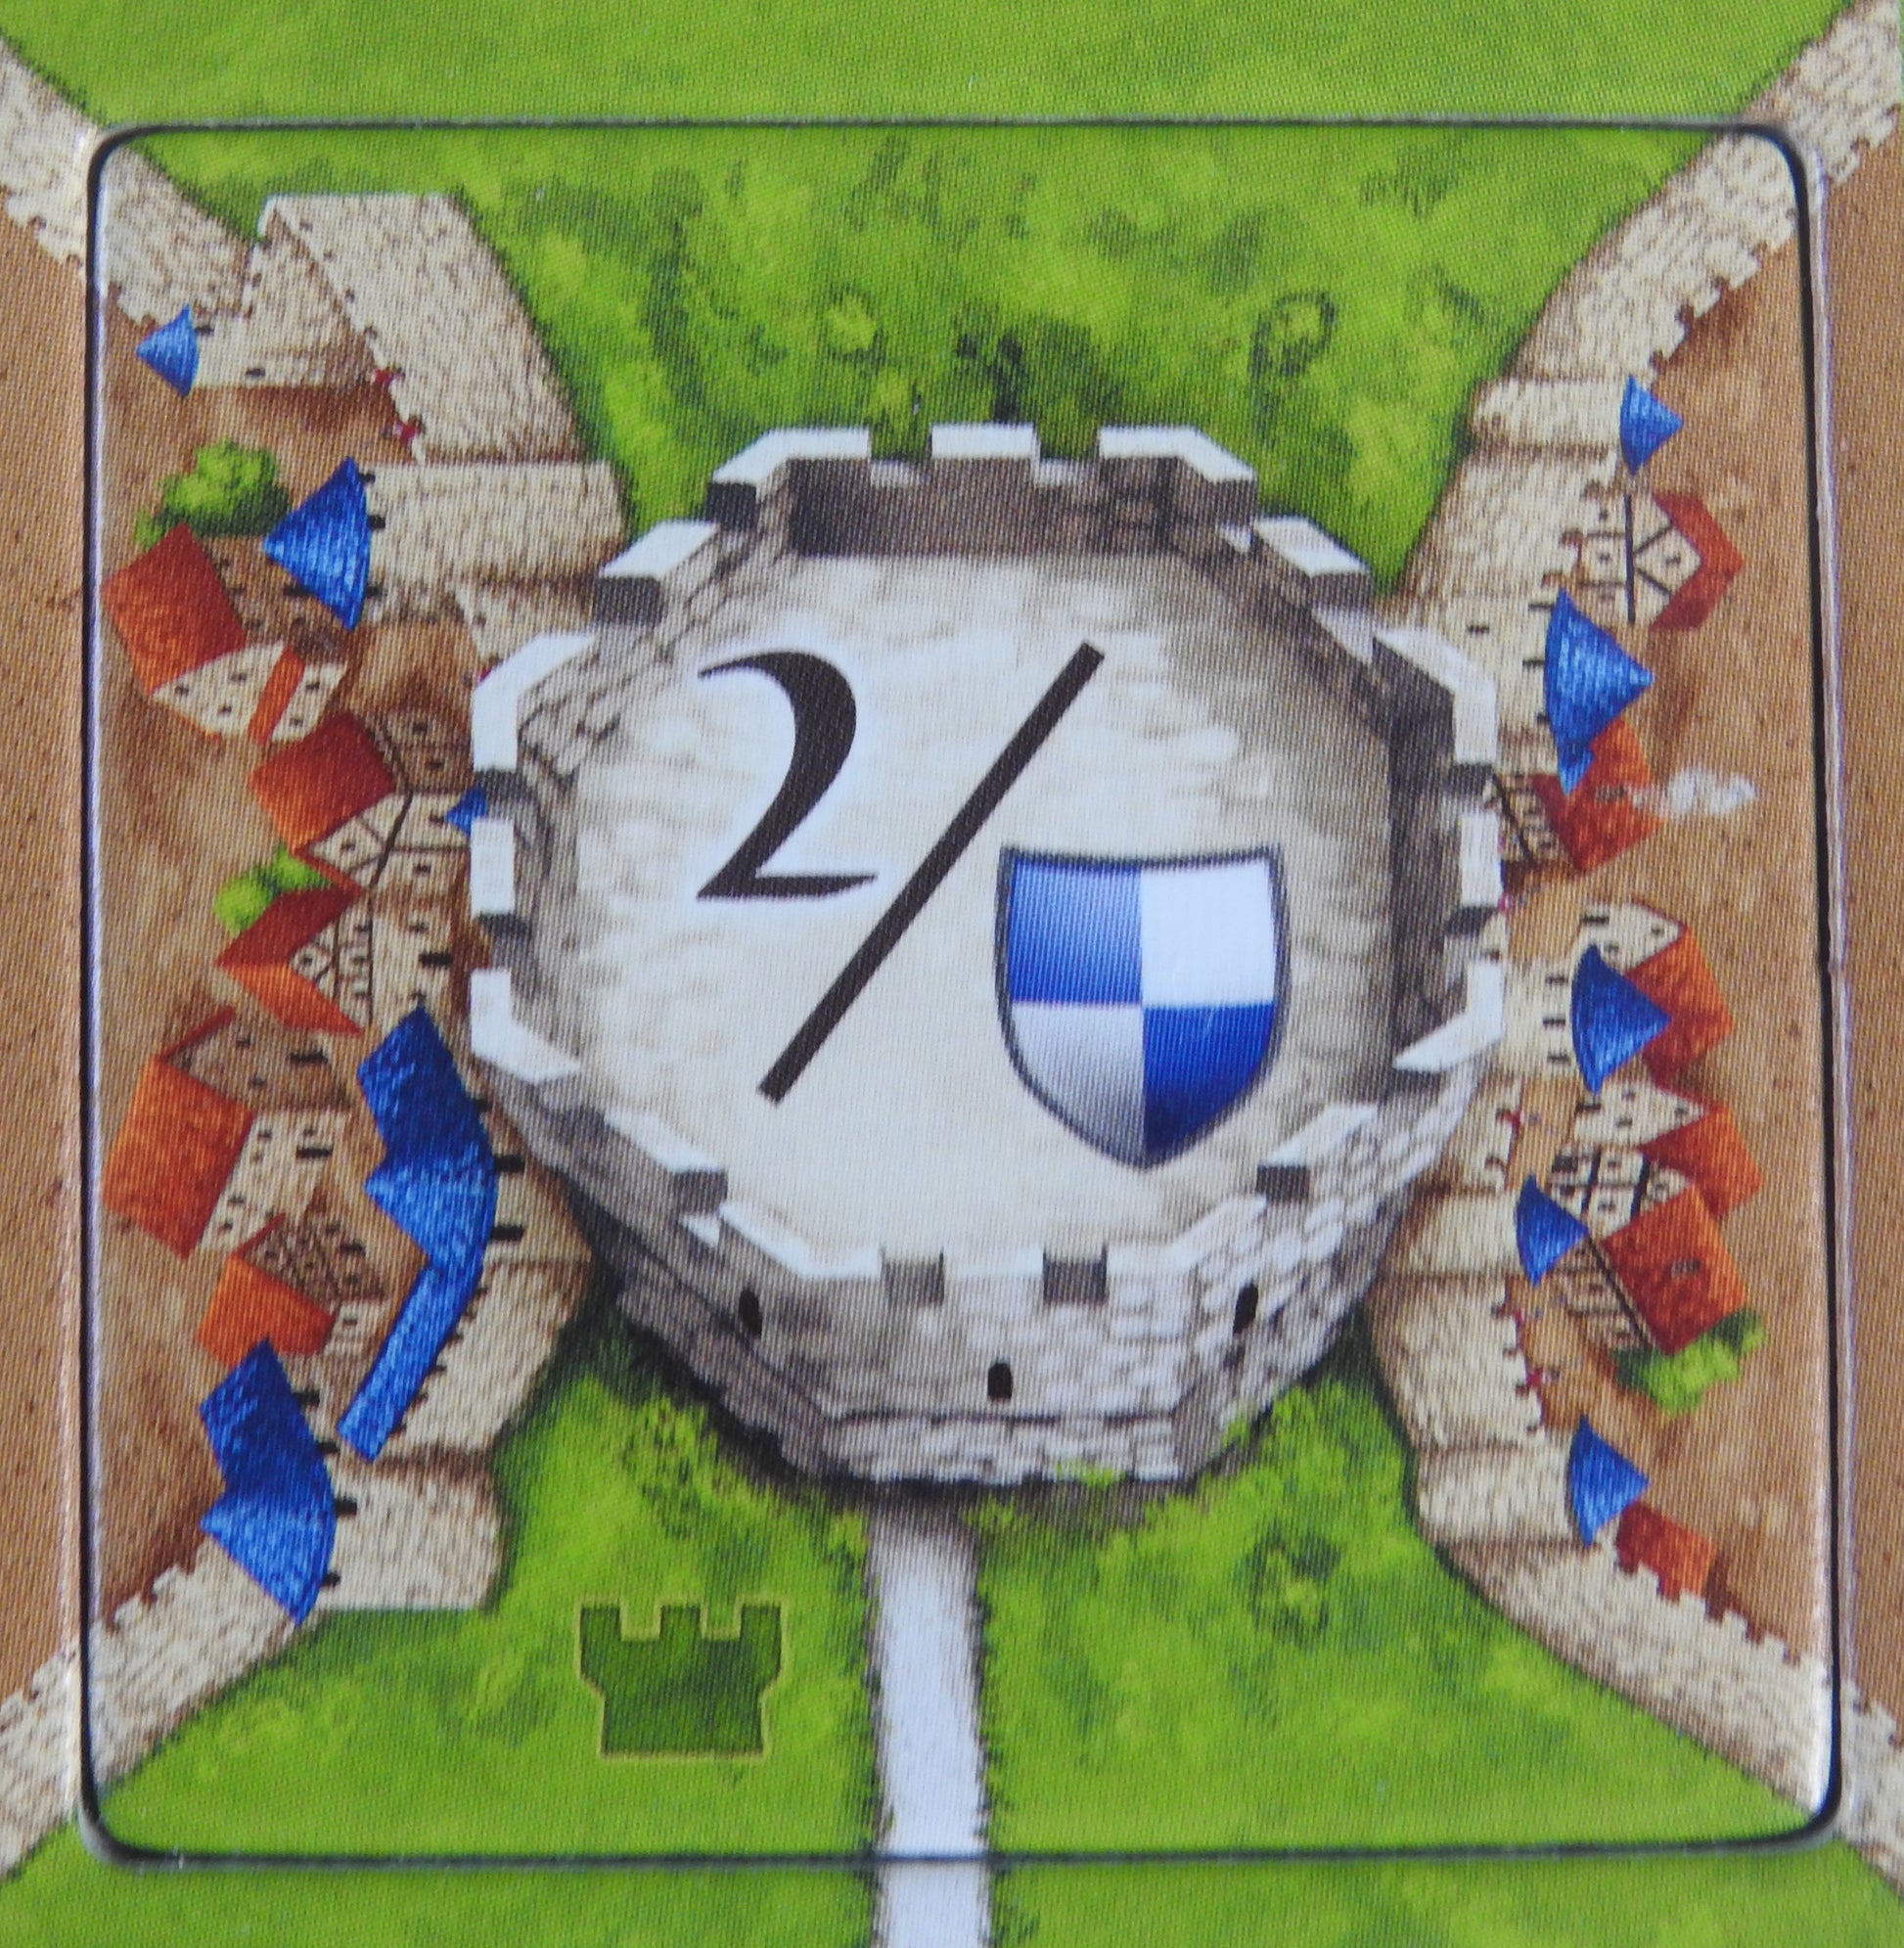 Close-up view of one of the Watchtower tiles.